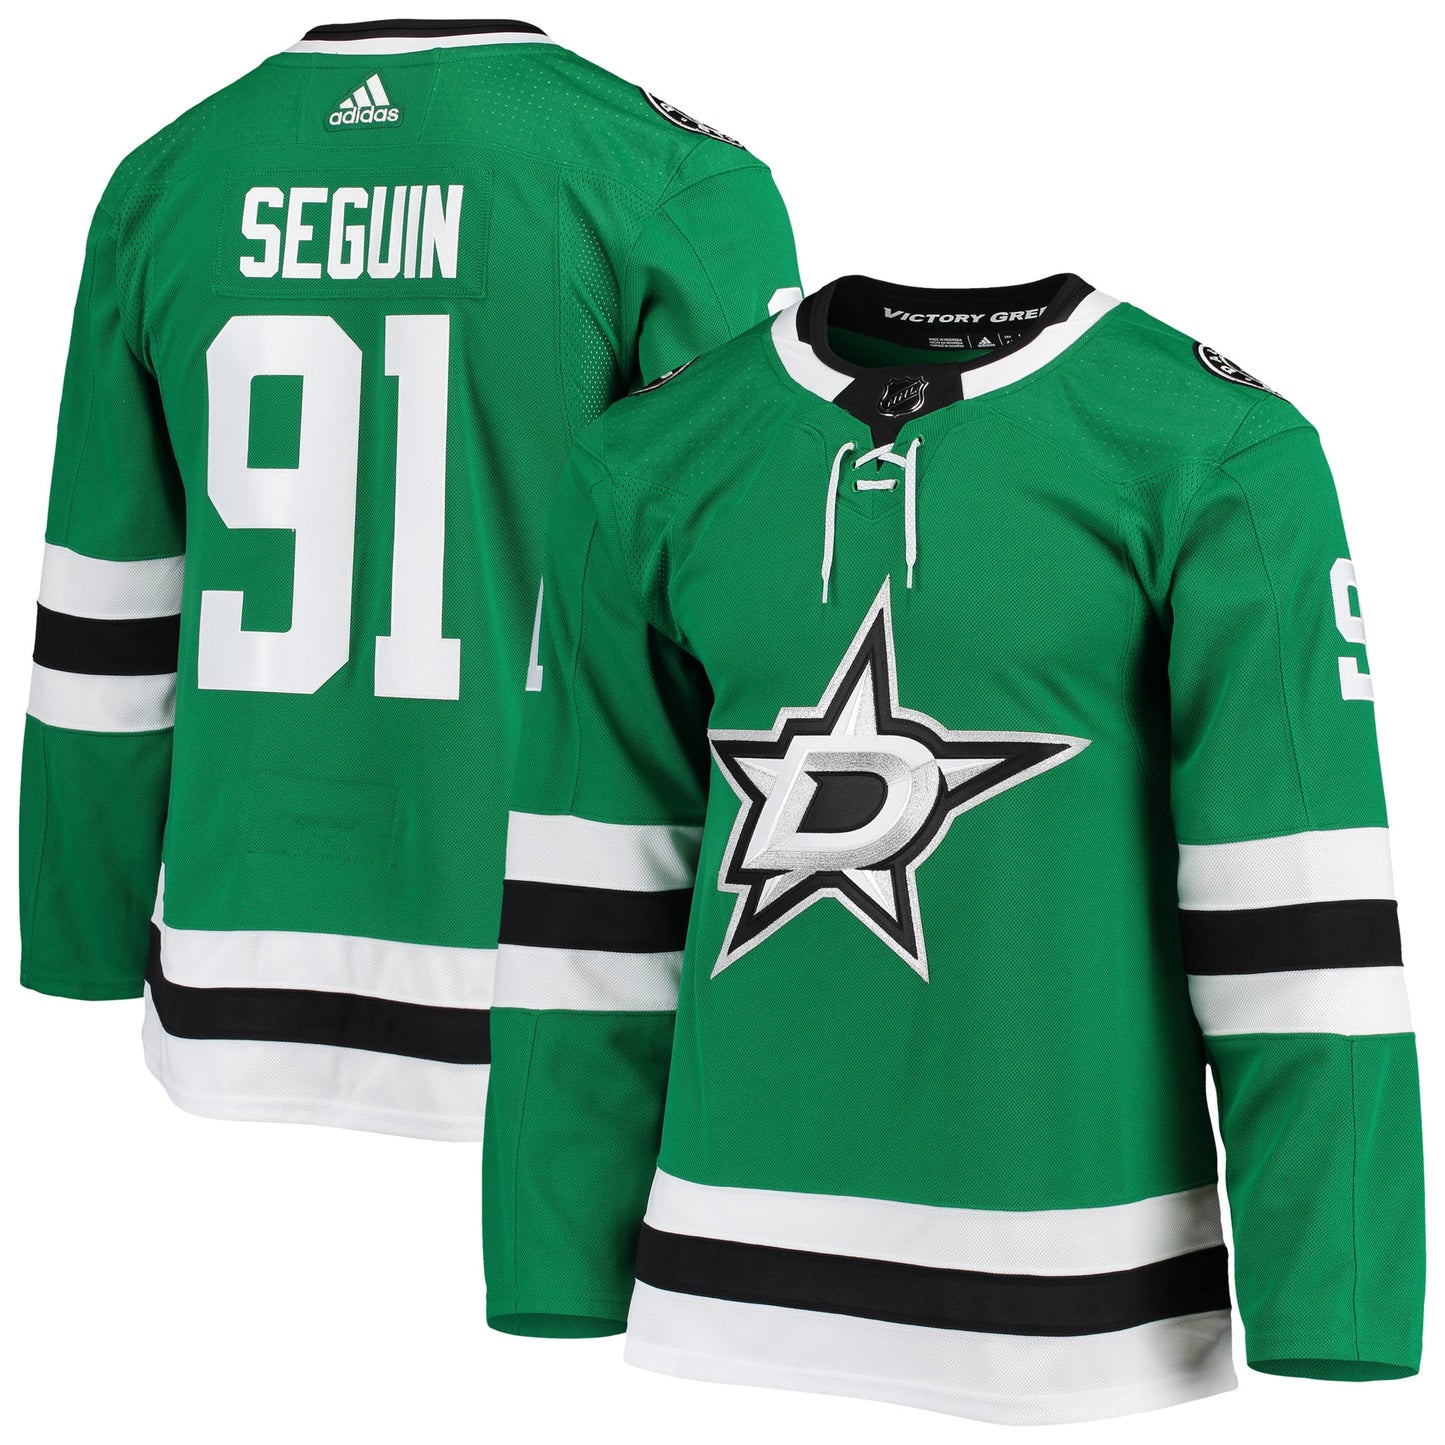 Tyler Seguin Dallas Stars adidas Home Primegreen Authentic Pro Player Jersey - Kelly Green